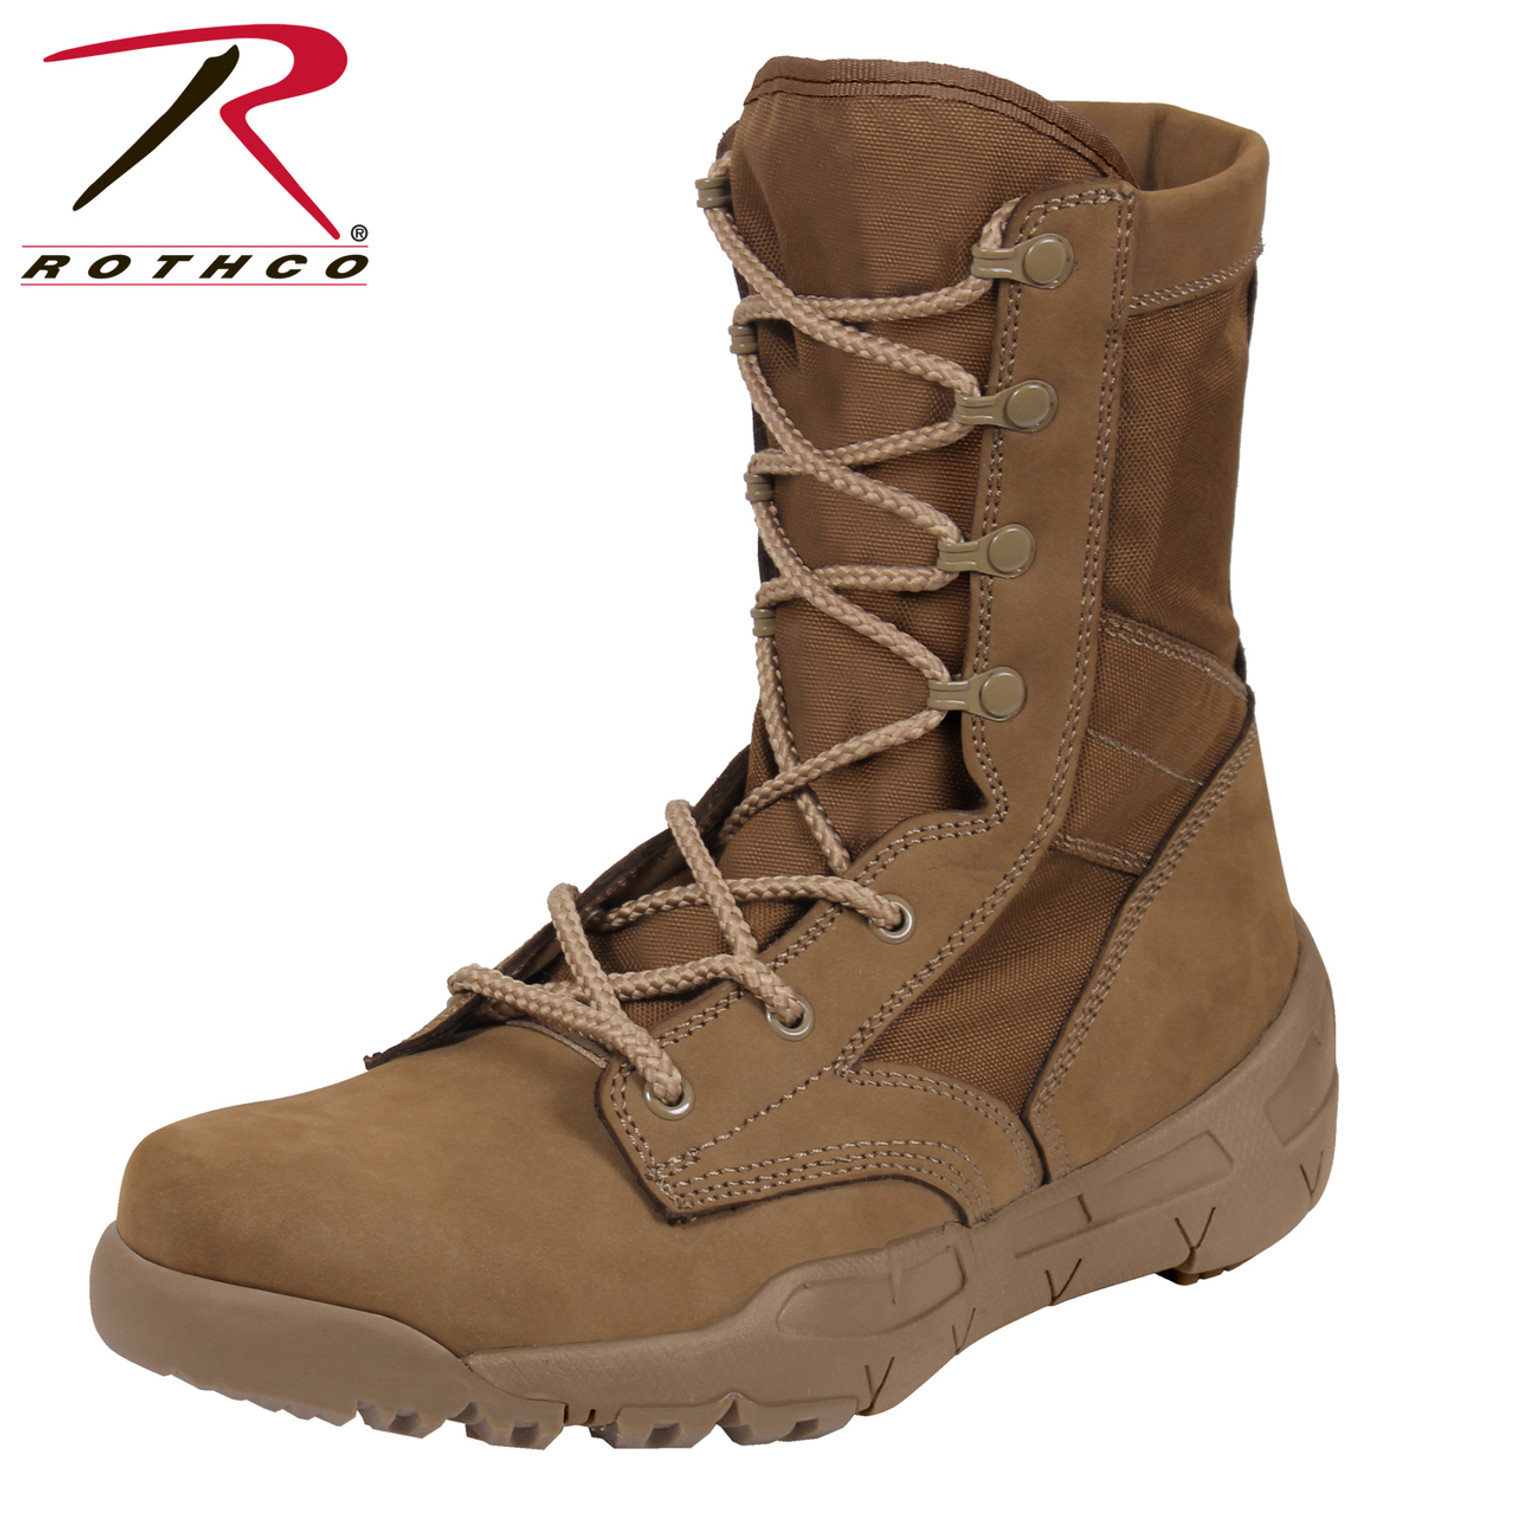 Rothco V-Max Lightweight Tactical Boot - Coyote Brown